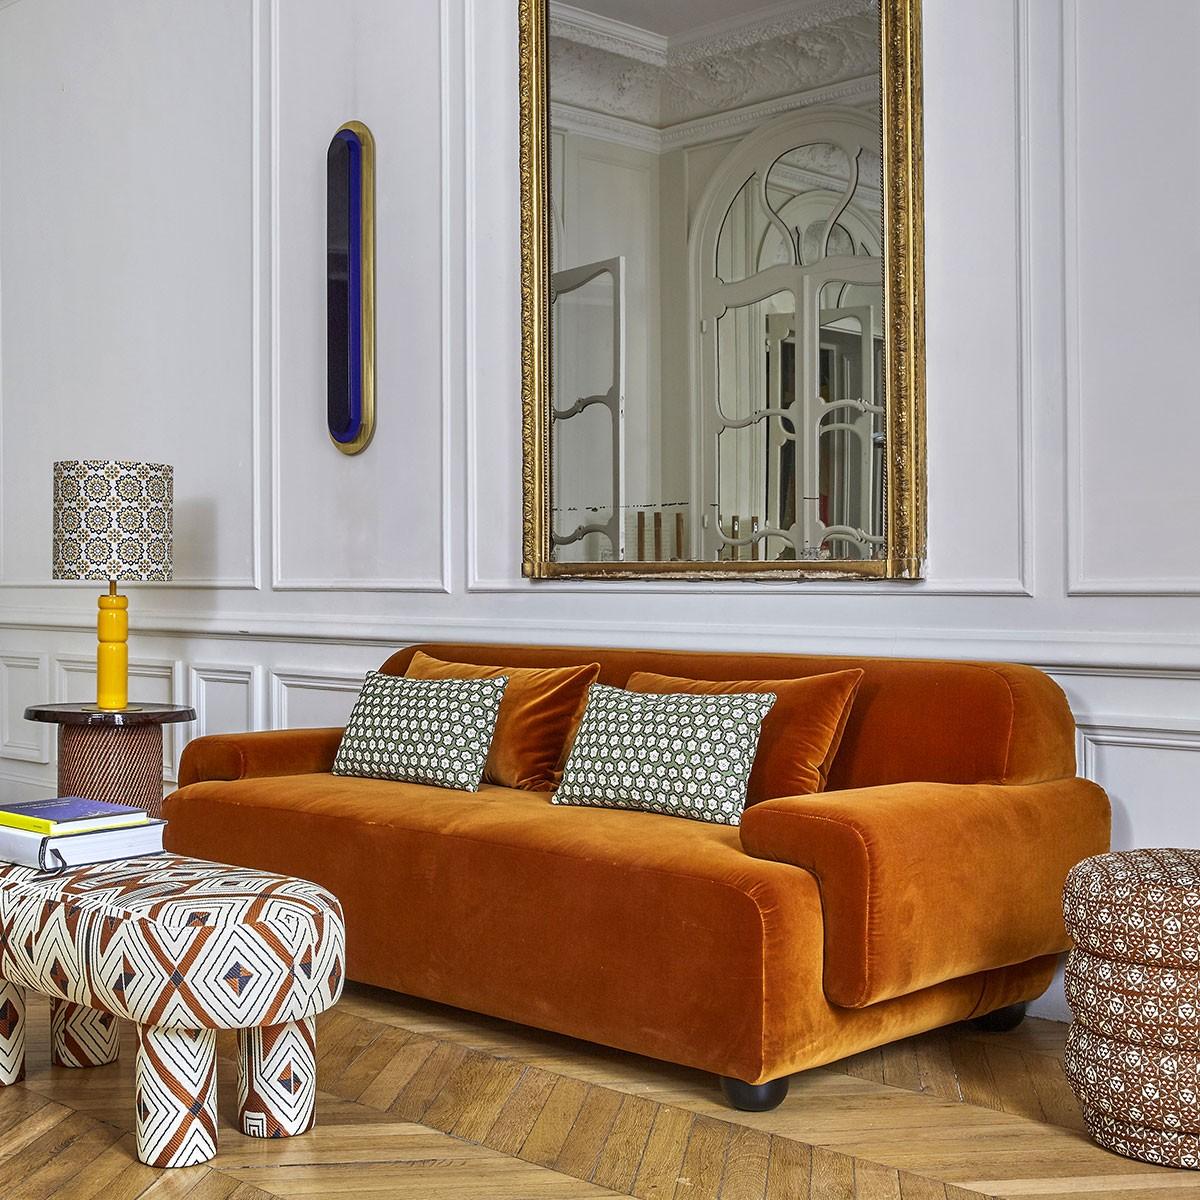 Popus Editions Lena 2.5 seater sofa in Orange-Red Como Velvet Upholstery

It looks like it's straight out of a movie, with its generous curves and wide armrests. It is a real invitation to spend long Sundays with the family, comfortably seated in